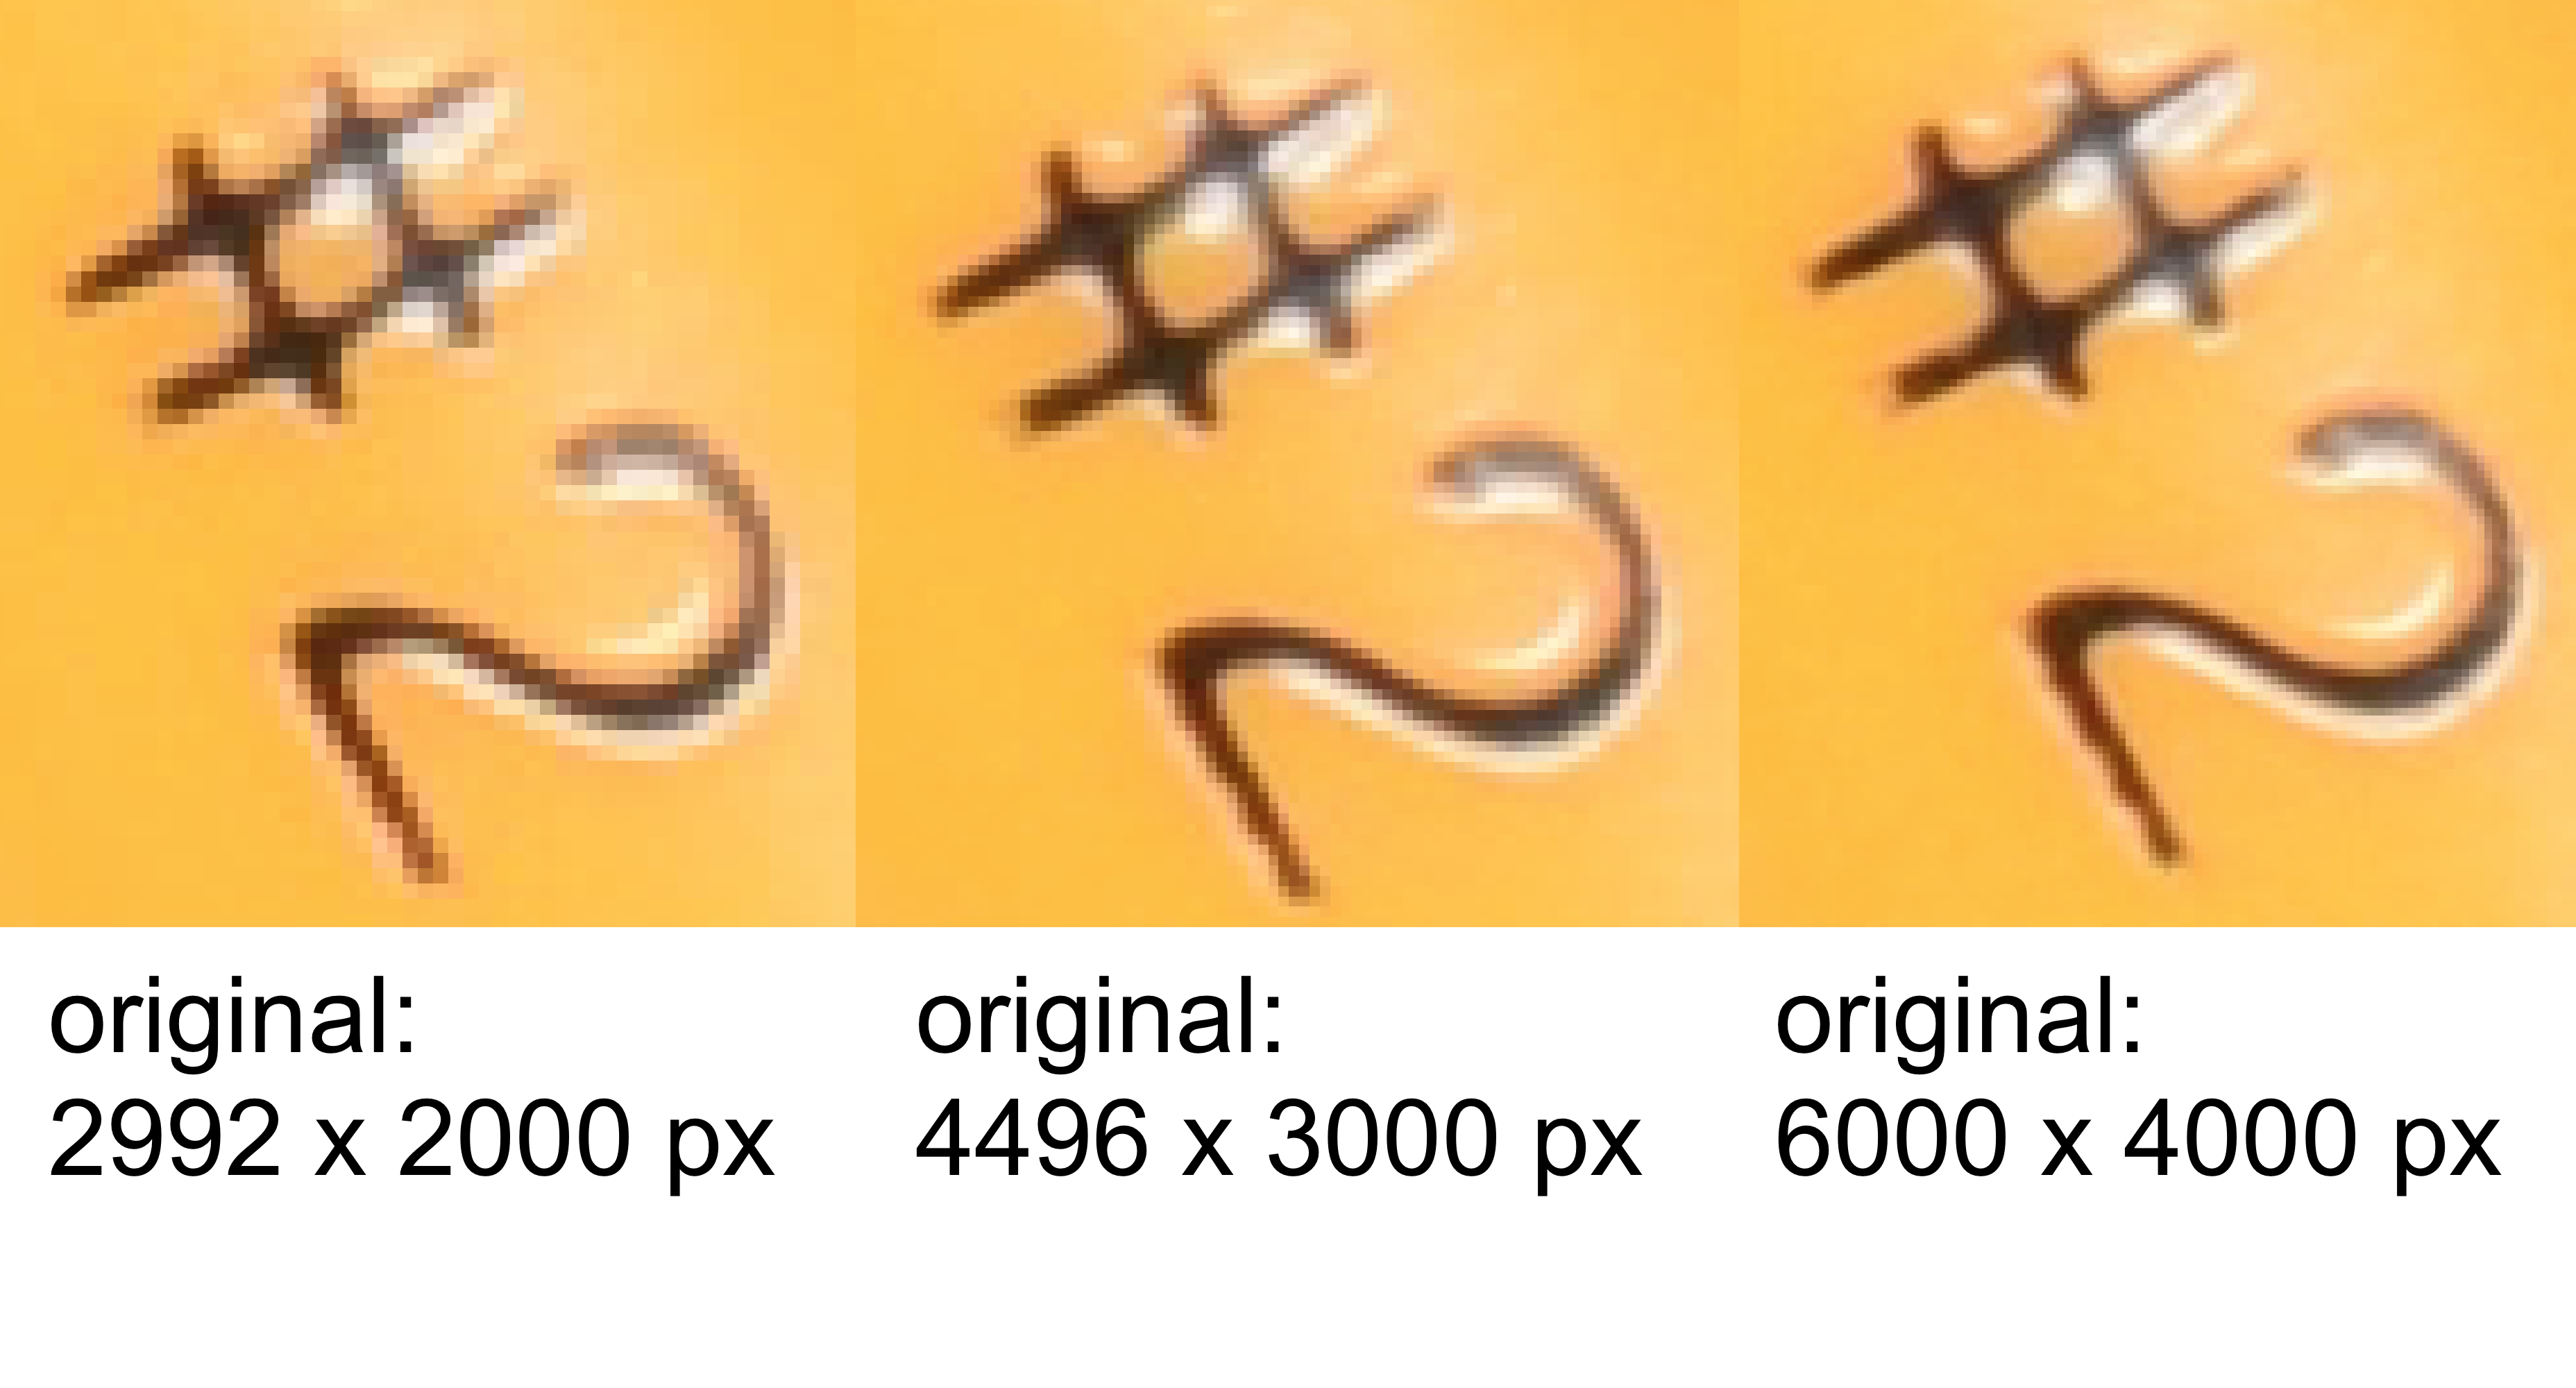 Comparison image showing three different very small crops of the above still life; all three images are only the "#2" written on the pencil. From left to right, the pixelation of the "#2" decreases as the original image quality increases from small to medium to large.